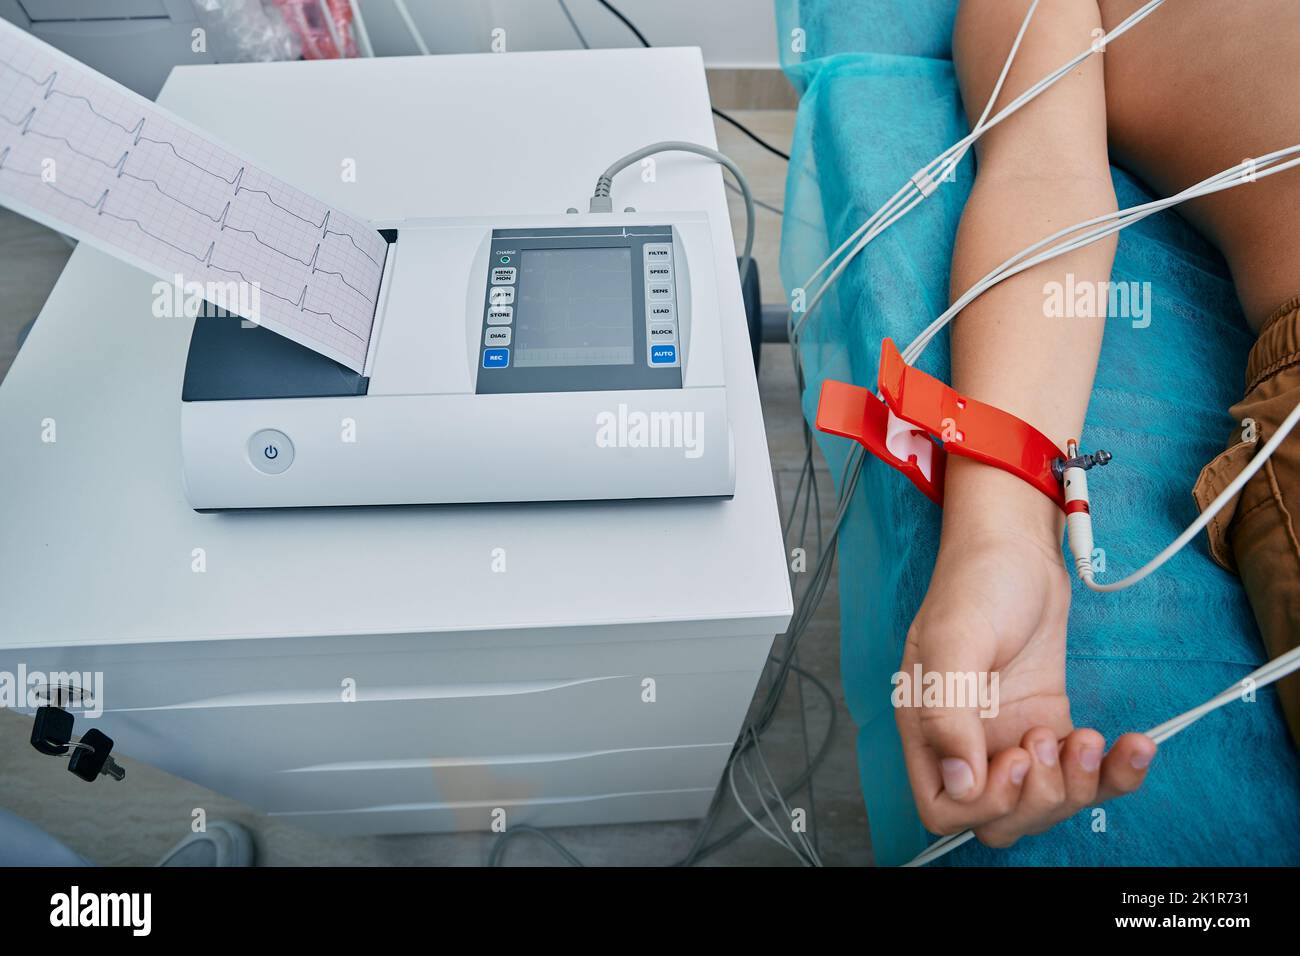 Heart electrocardiography for children. Cardiograph with ECG printout for child patient lying in medical bed with vacuum sensors Stock Photo